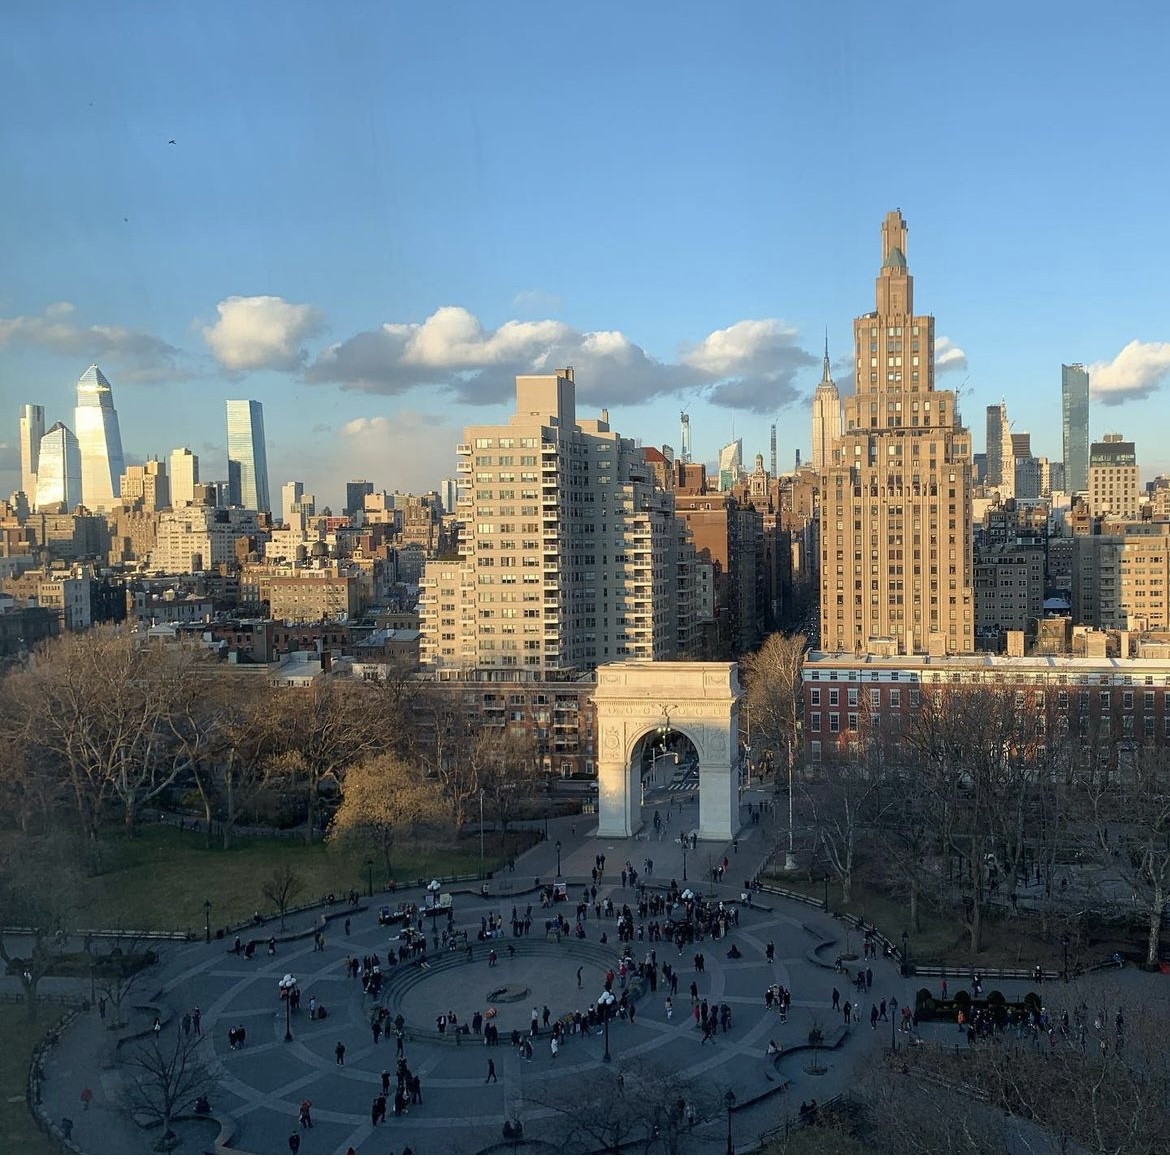 An aerial view of Washington Square Park.